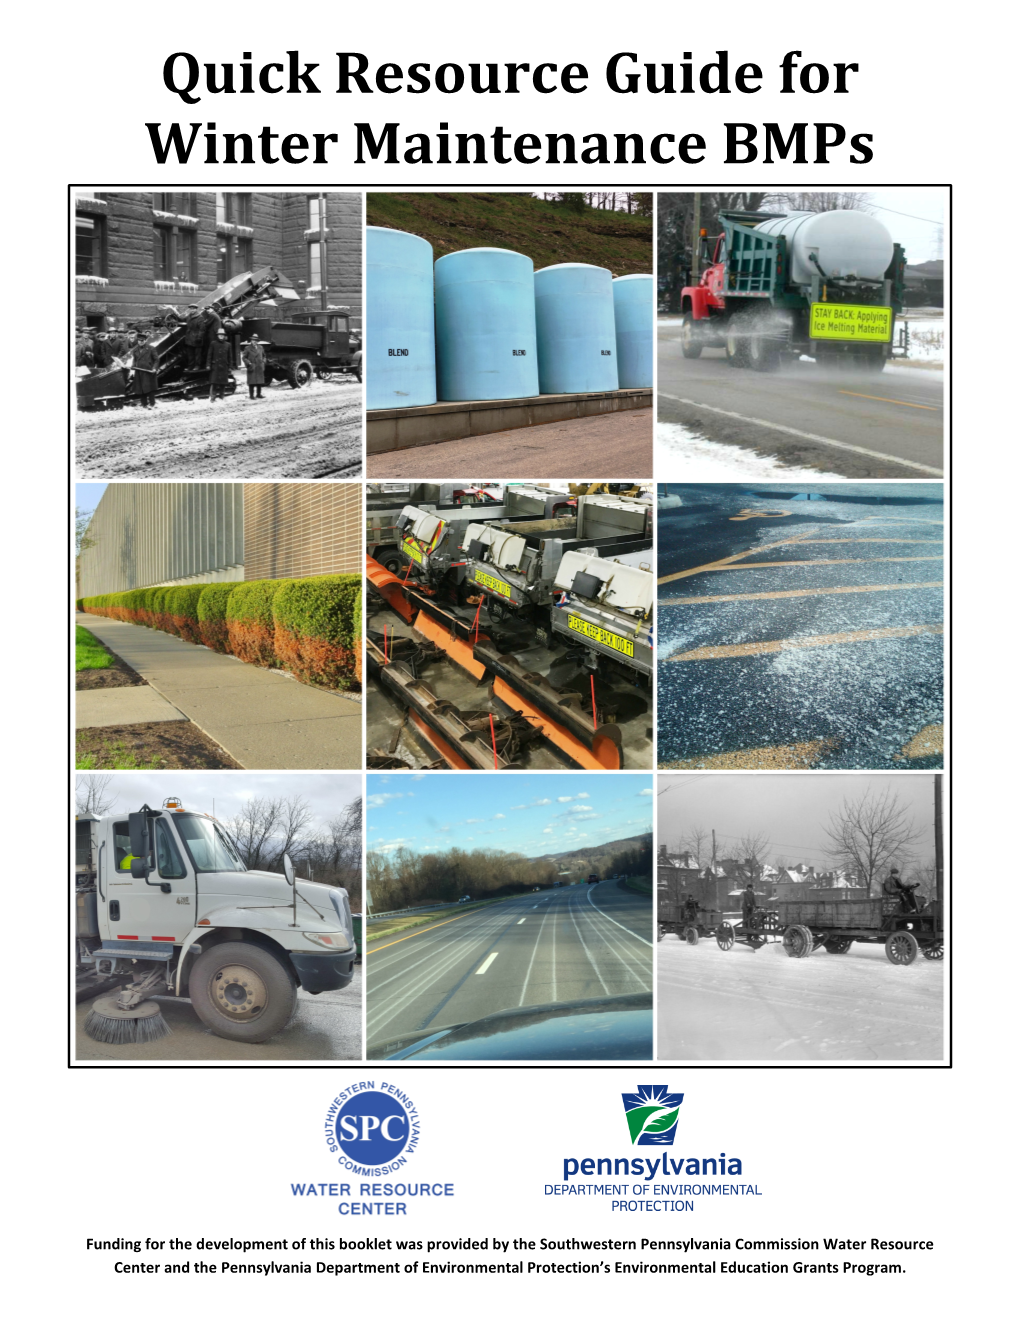 Quick Resource Guide for Winter Maintenance Bmps